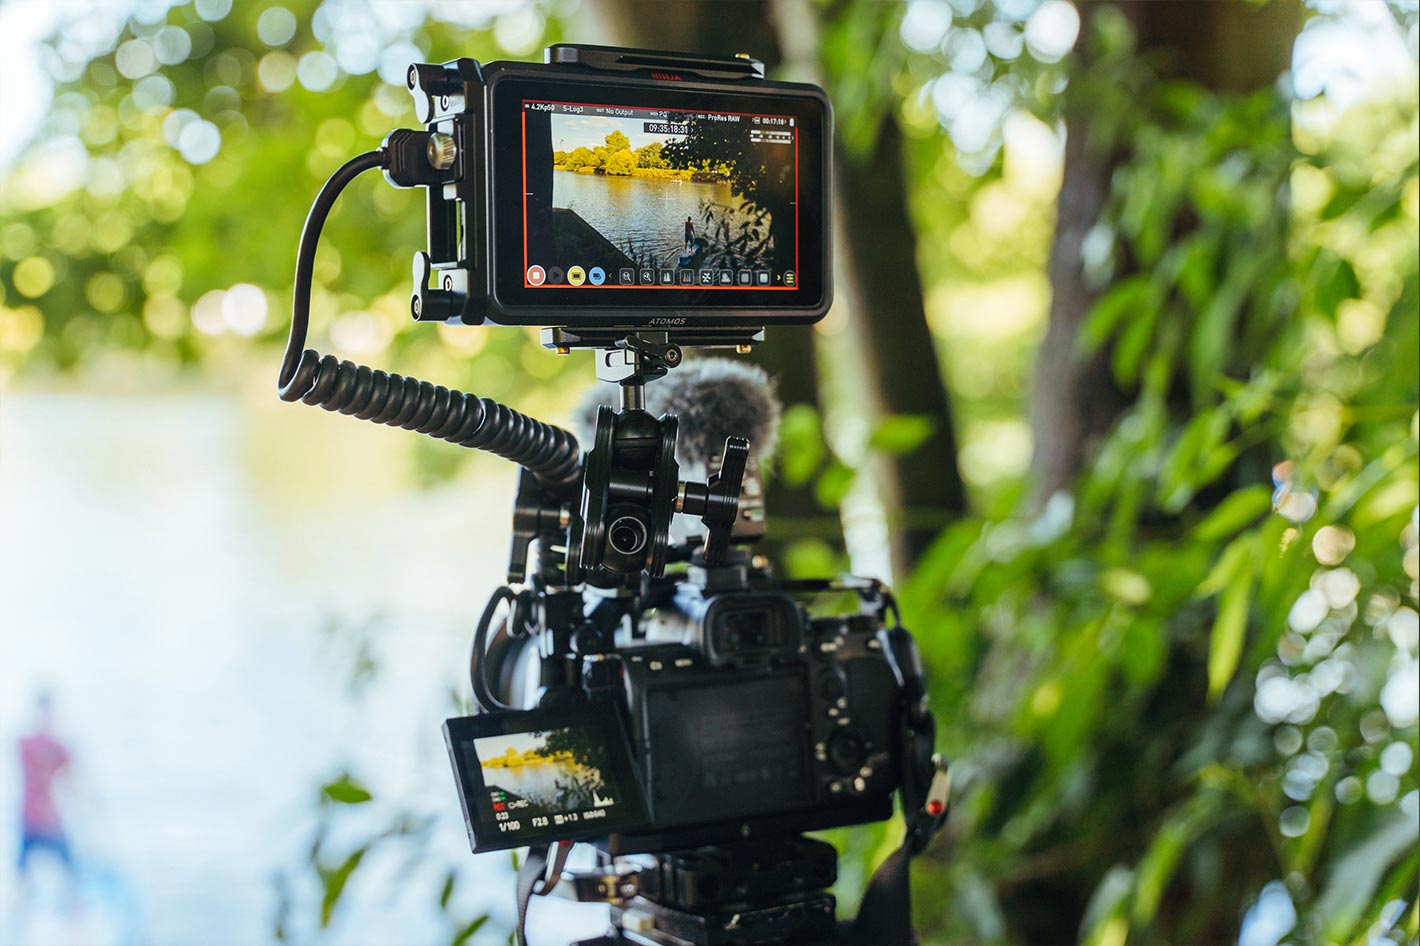 Atomos records 4Kp60 ProRes RAW with Sony Alpha 7S III